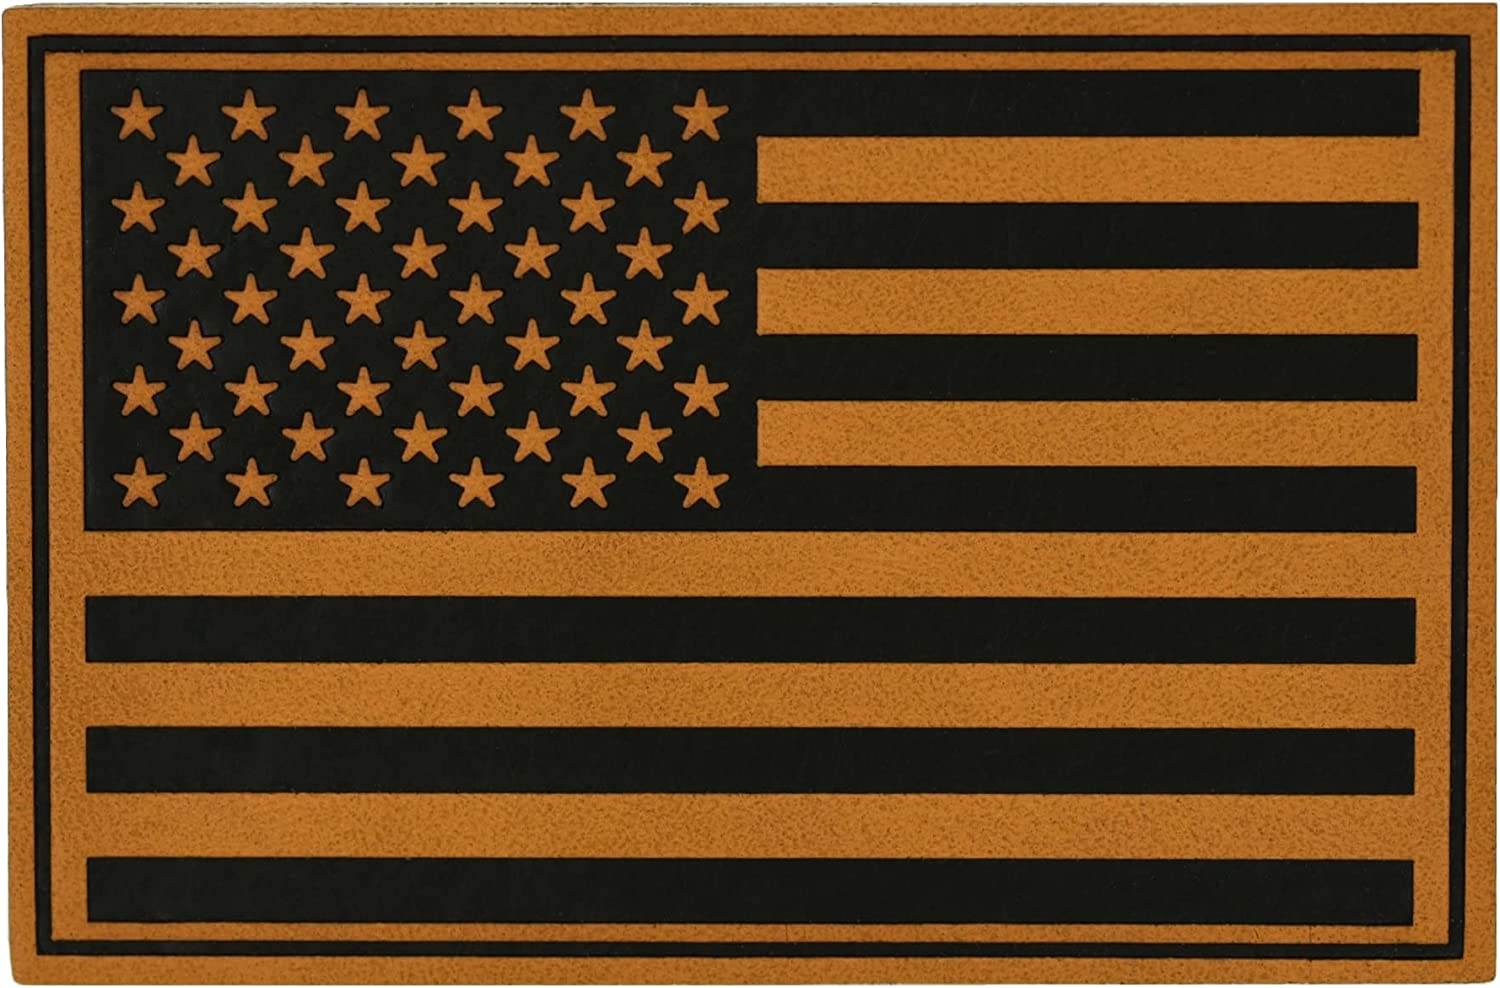 Leather American Flag Tan/Brown Military Tactical Patch